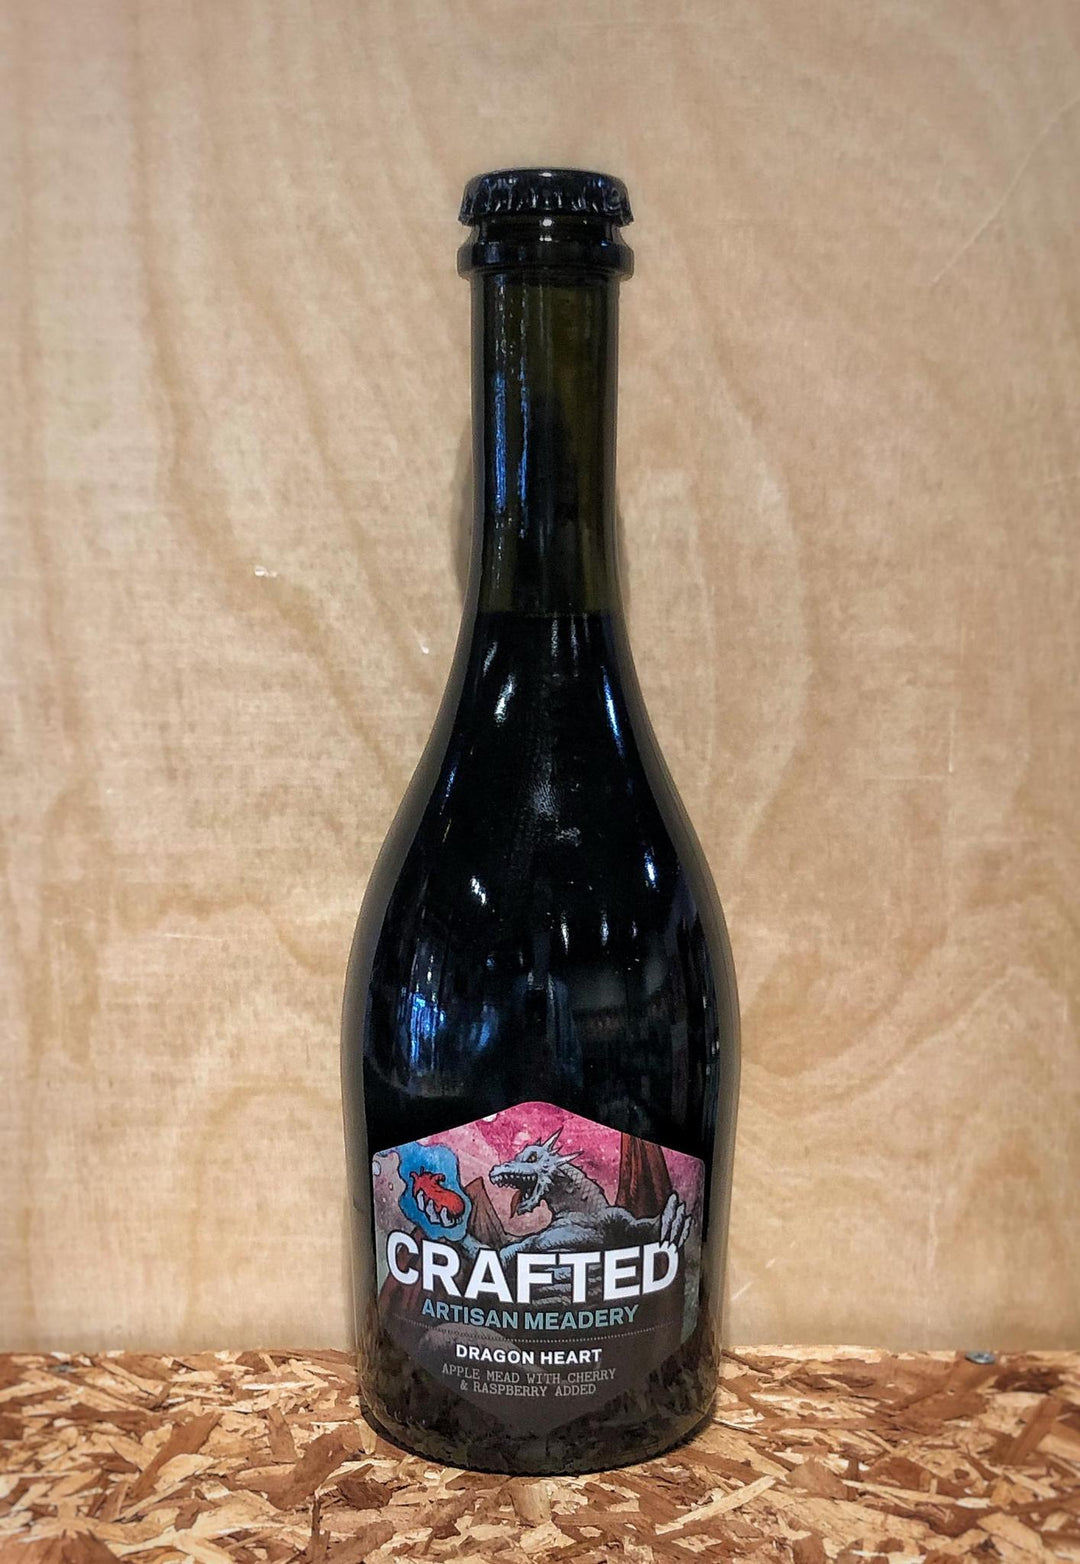 Crafted Meadery 'Dragon Heart' Apple Mead with Tart Cherry and Raspberry (Mogadore, OH)